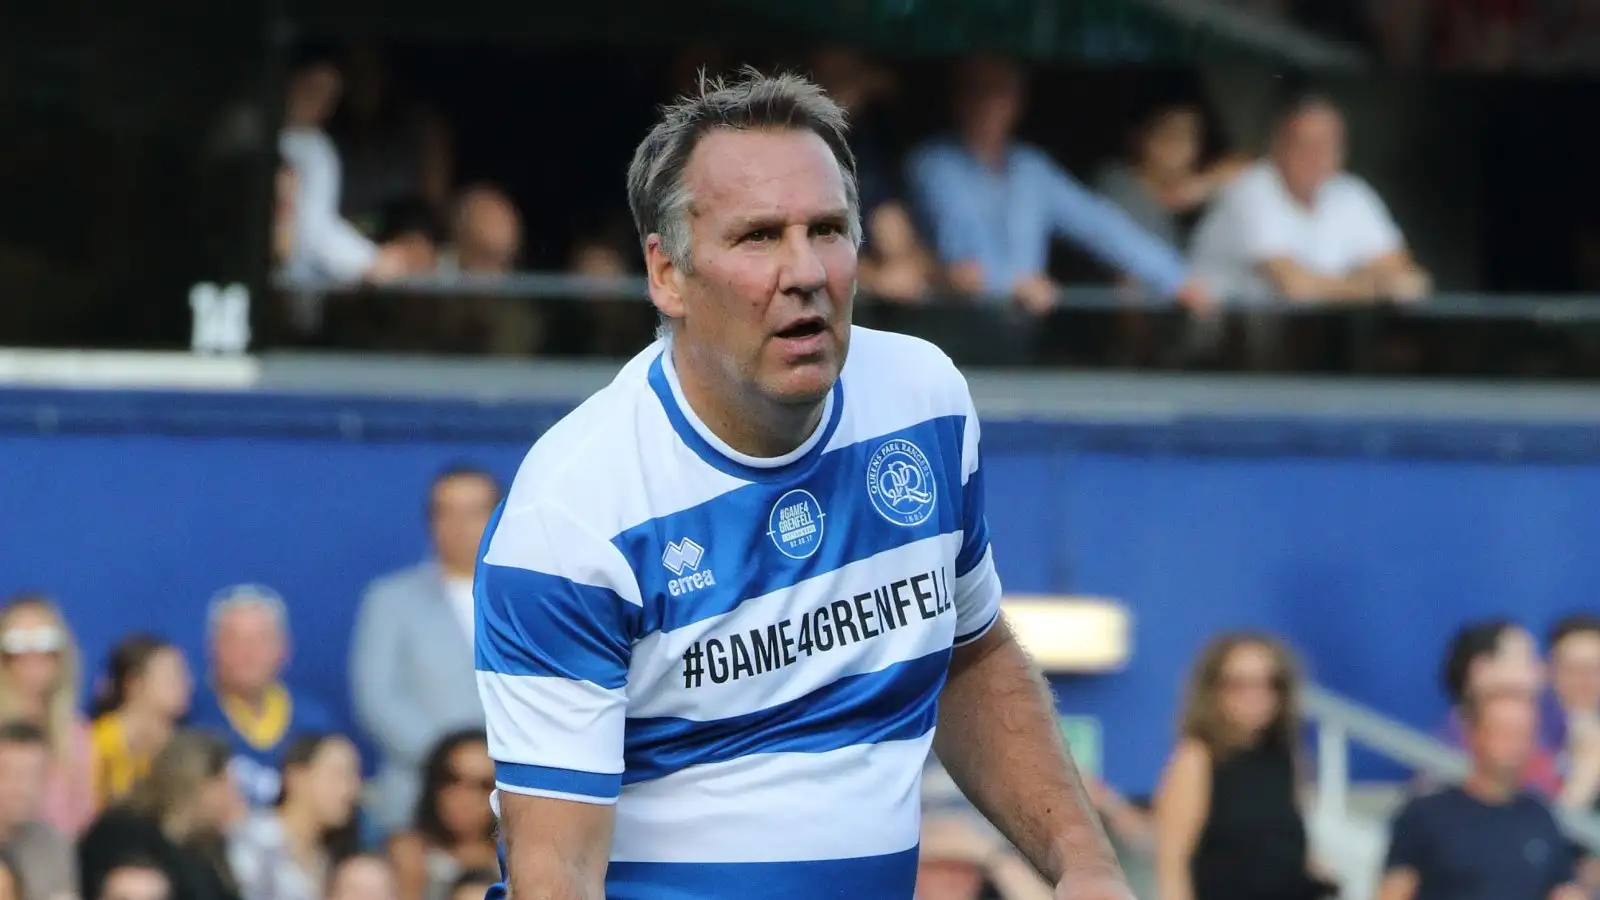 Arsenal legend Paul Merson takes part in a charity football match